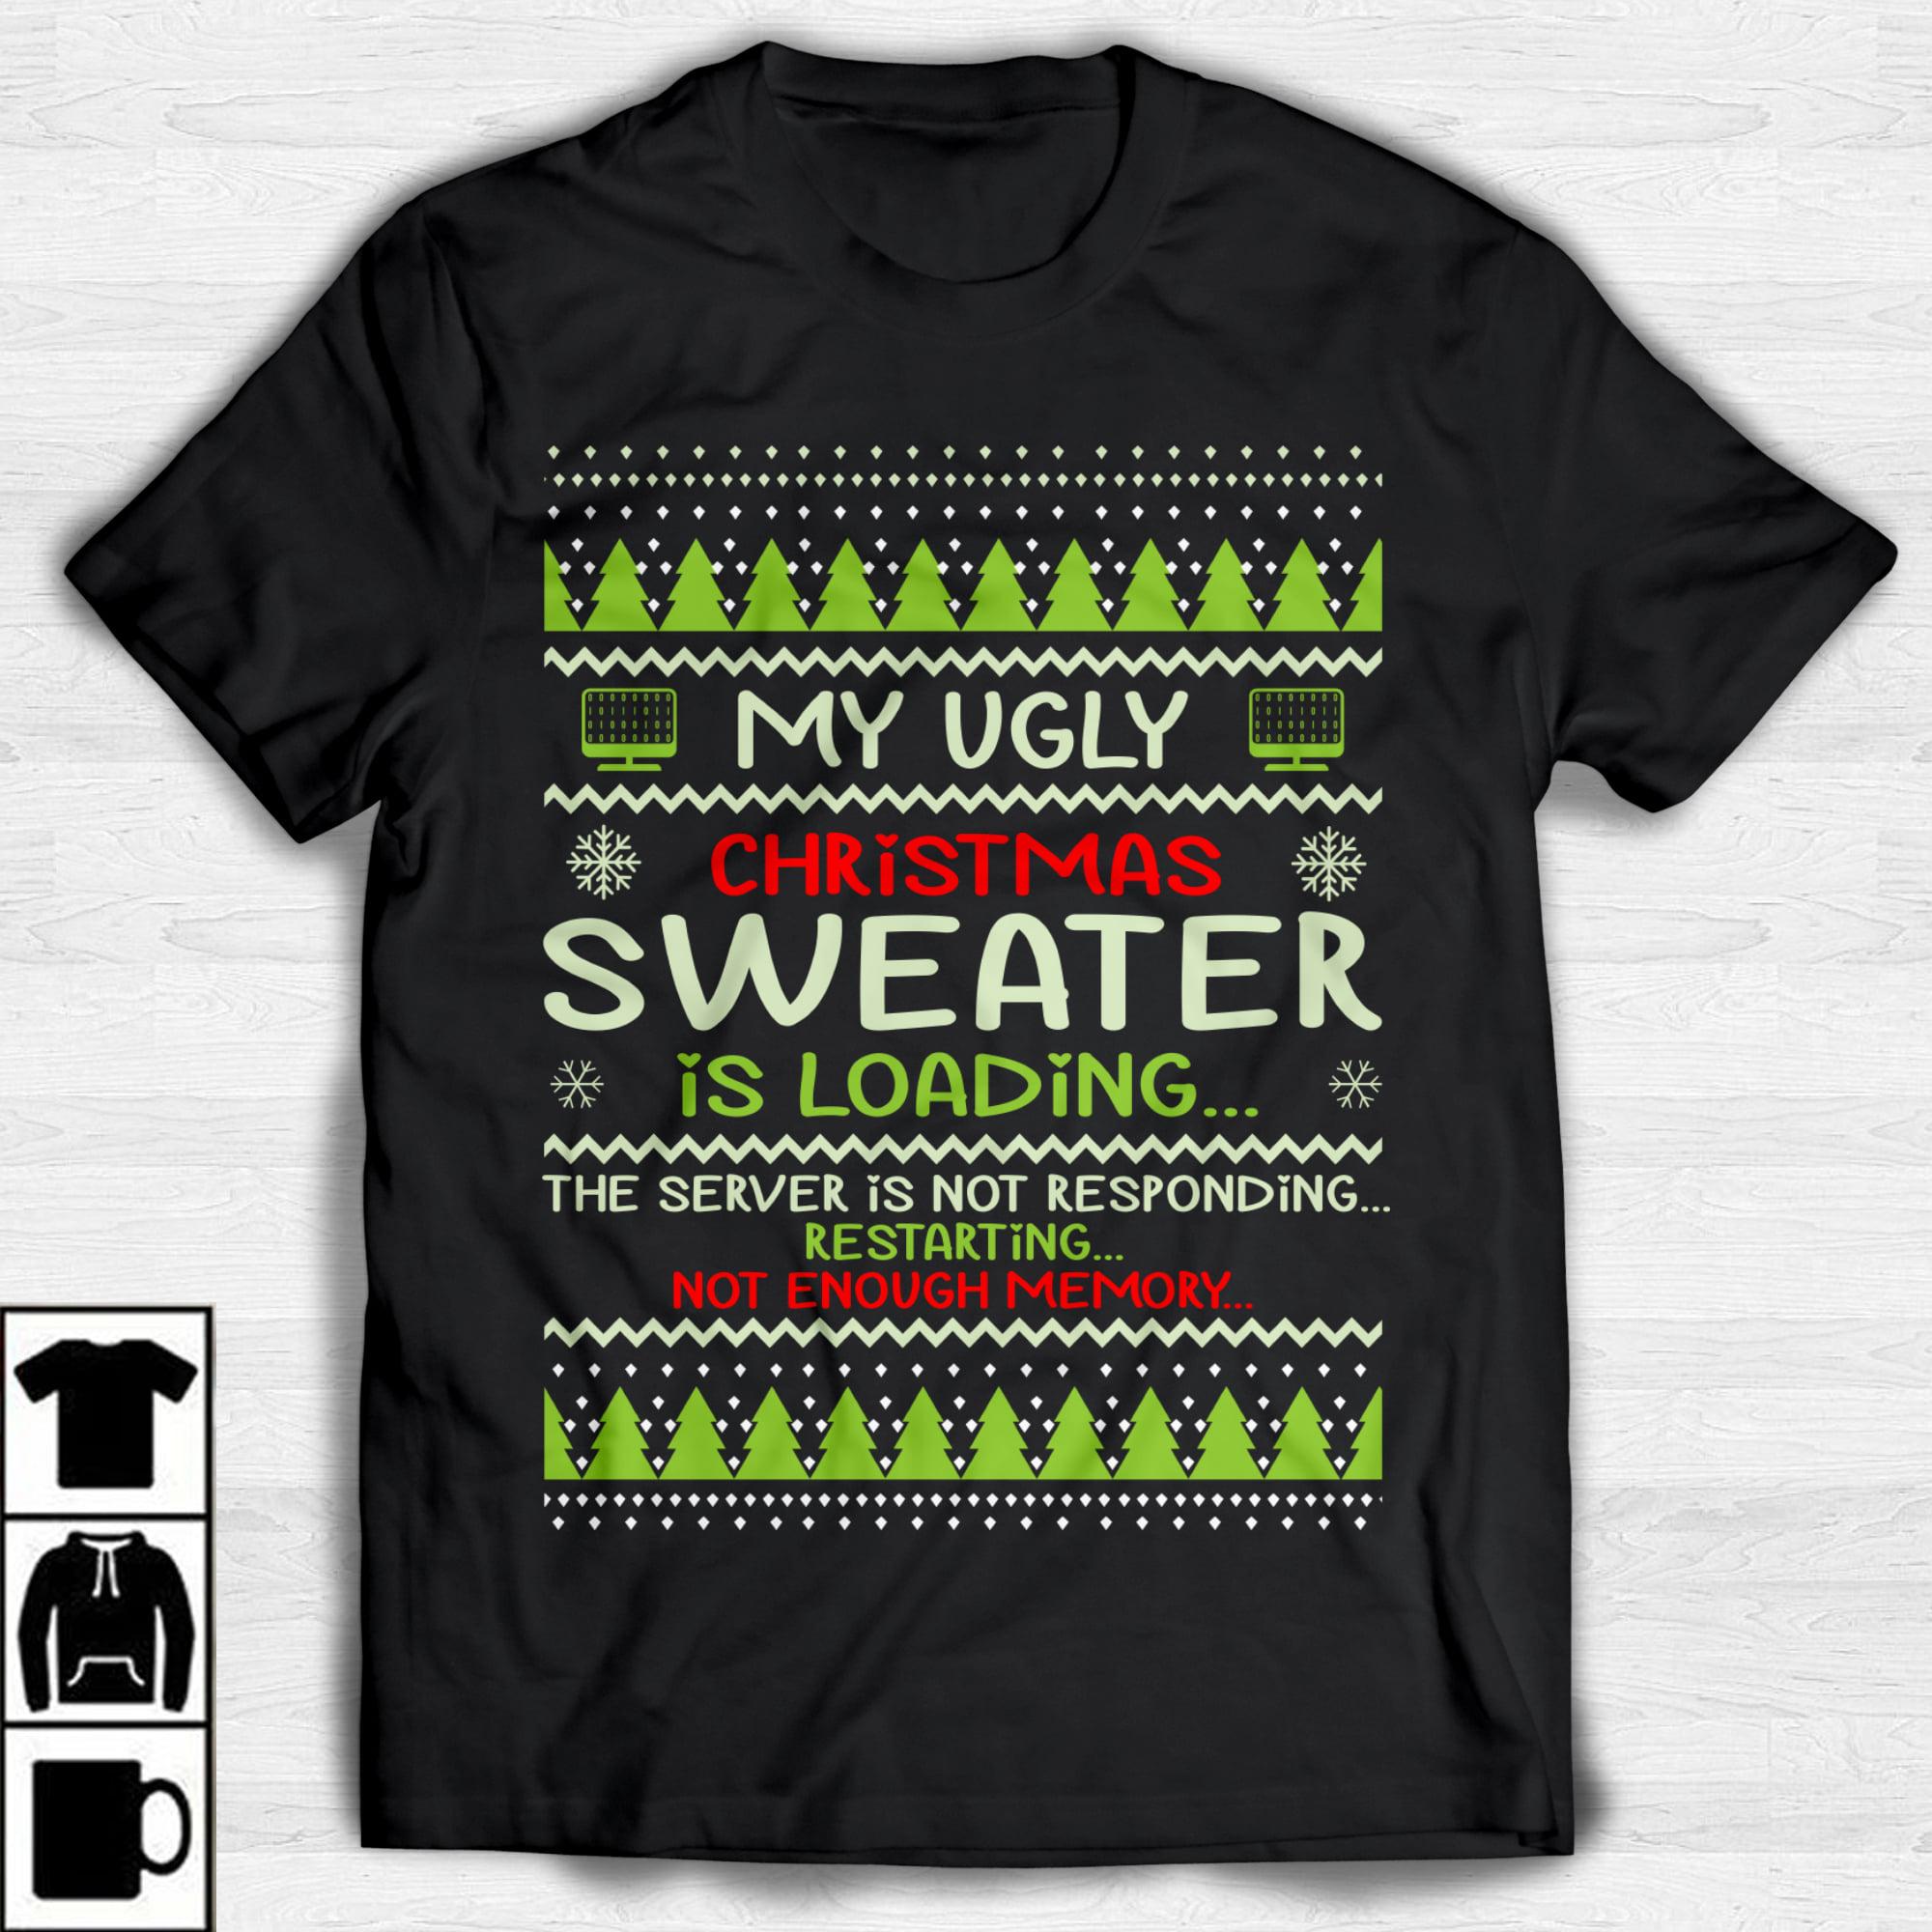 My ugly christmas sweater is loarding the server is not responding restarting not enough memory